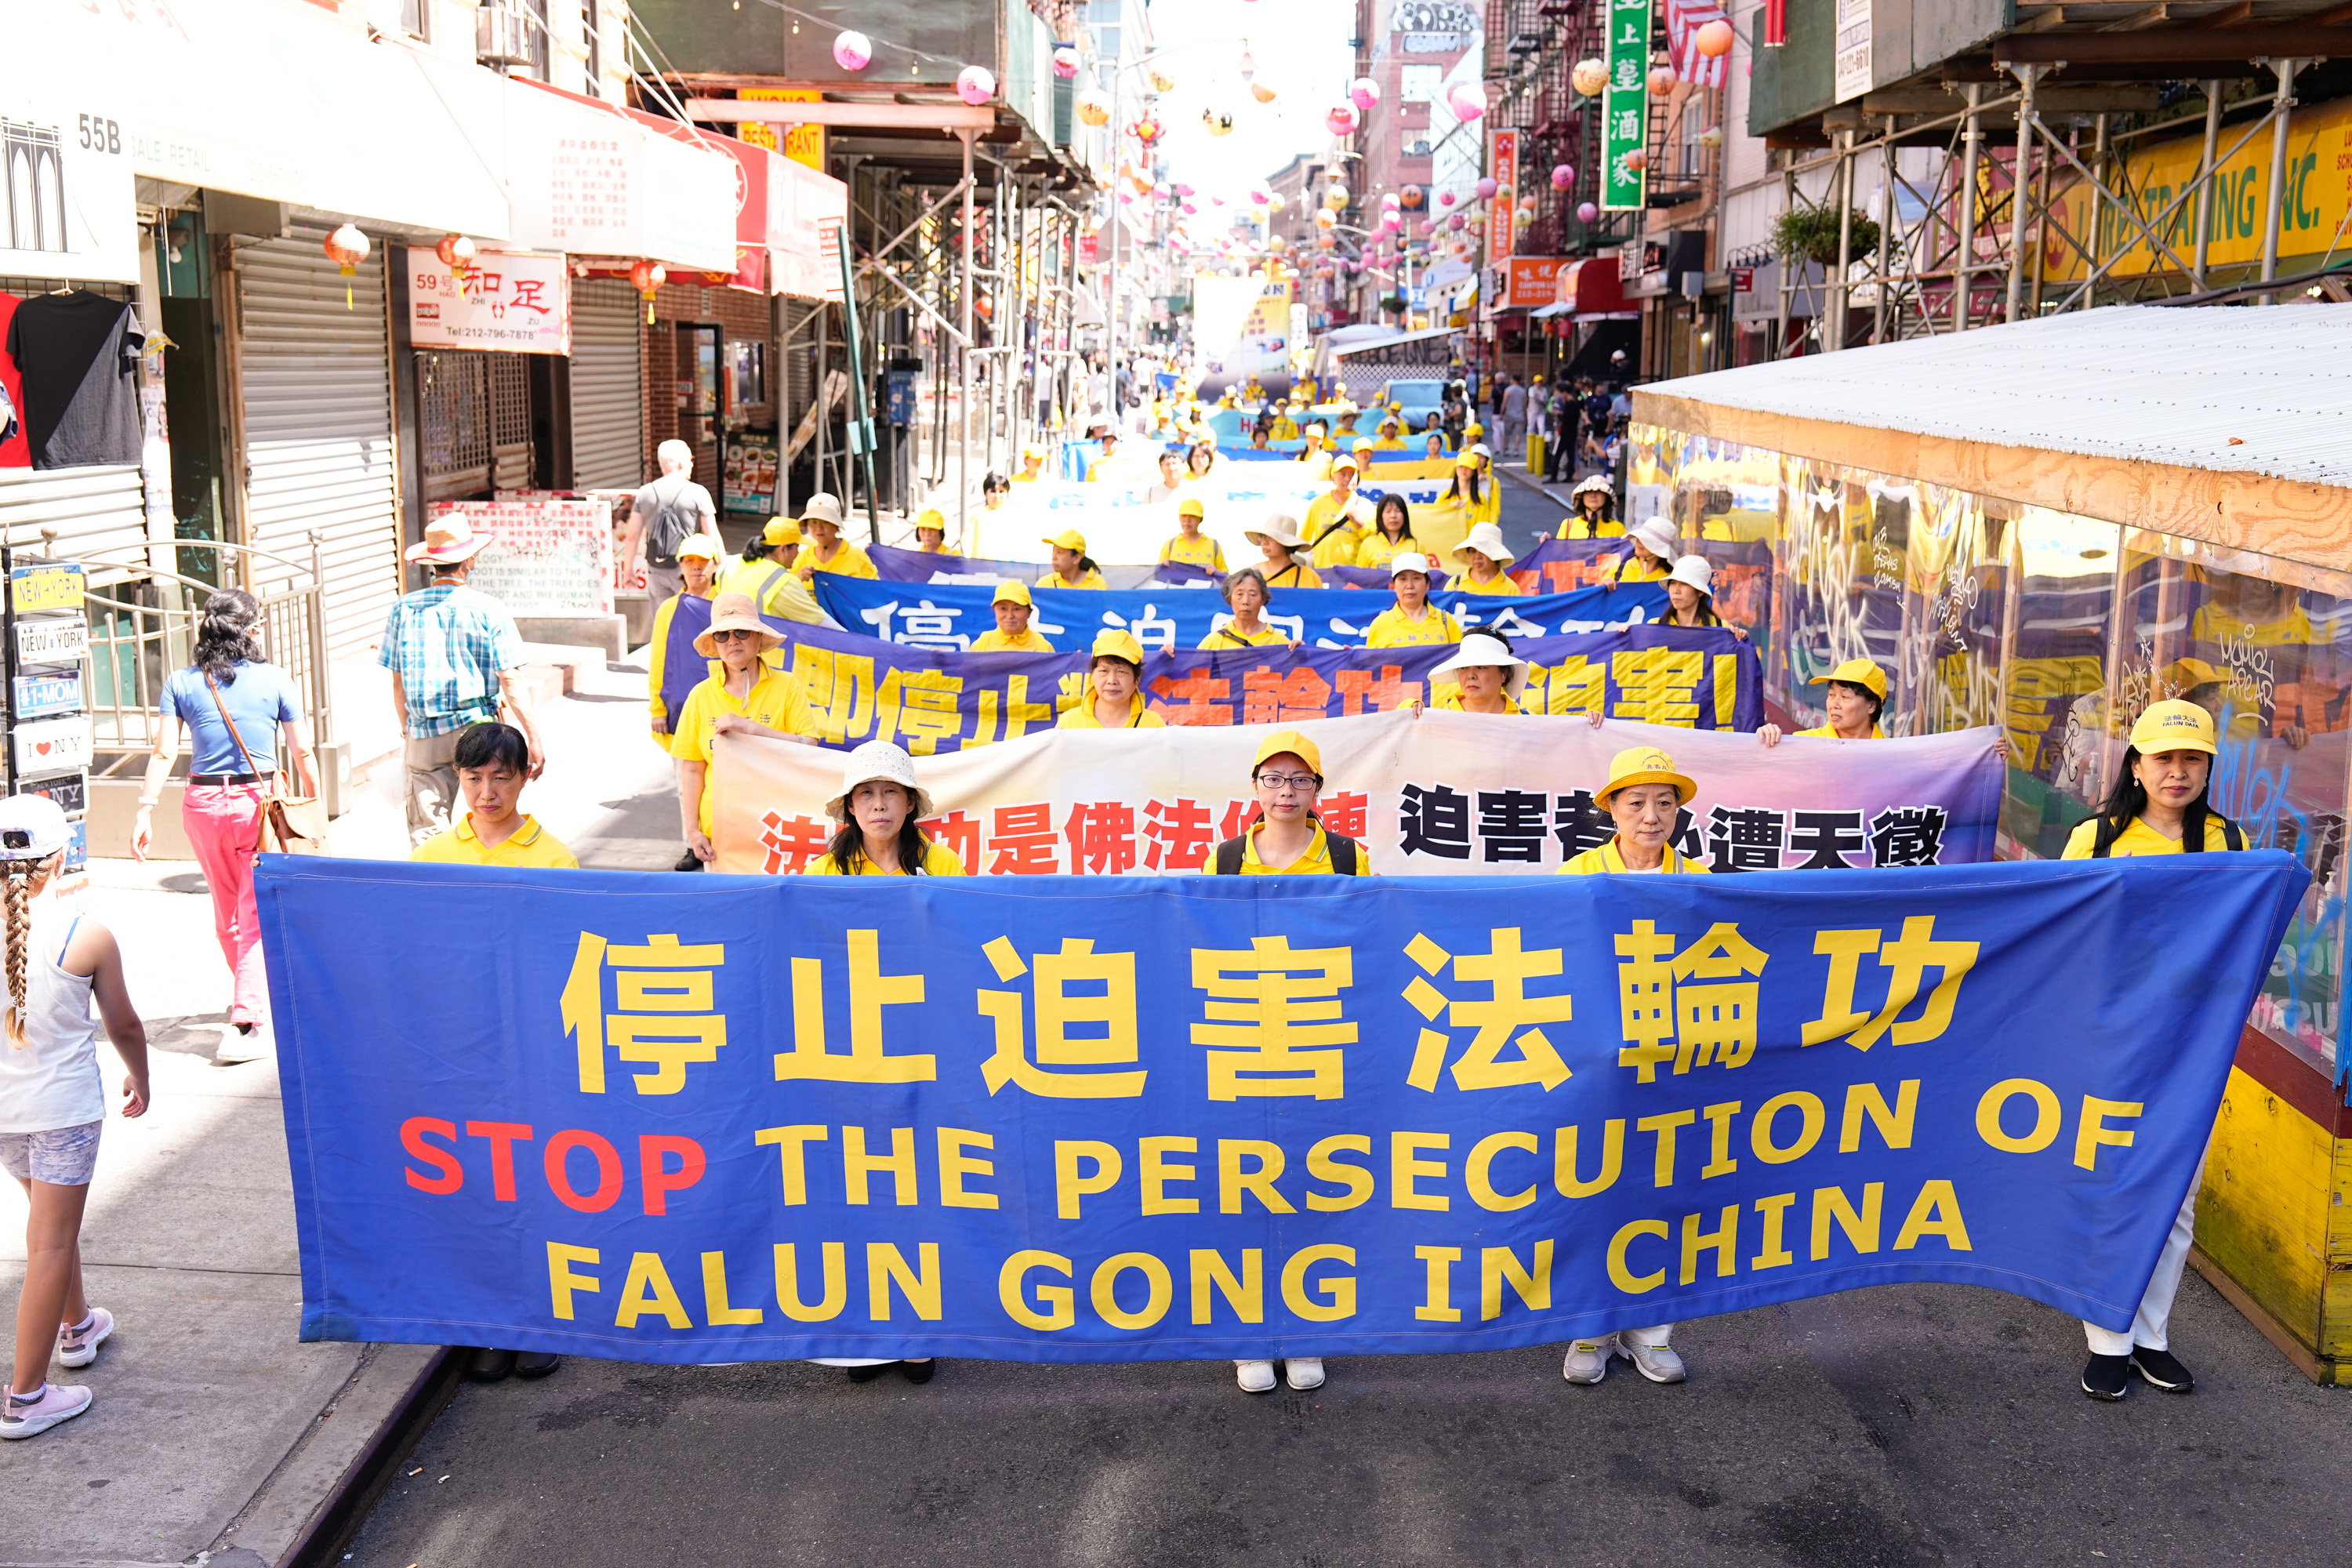 Weep for the Souls of the Falun Gong and Other Persecuted Minority Groups in China